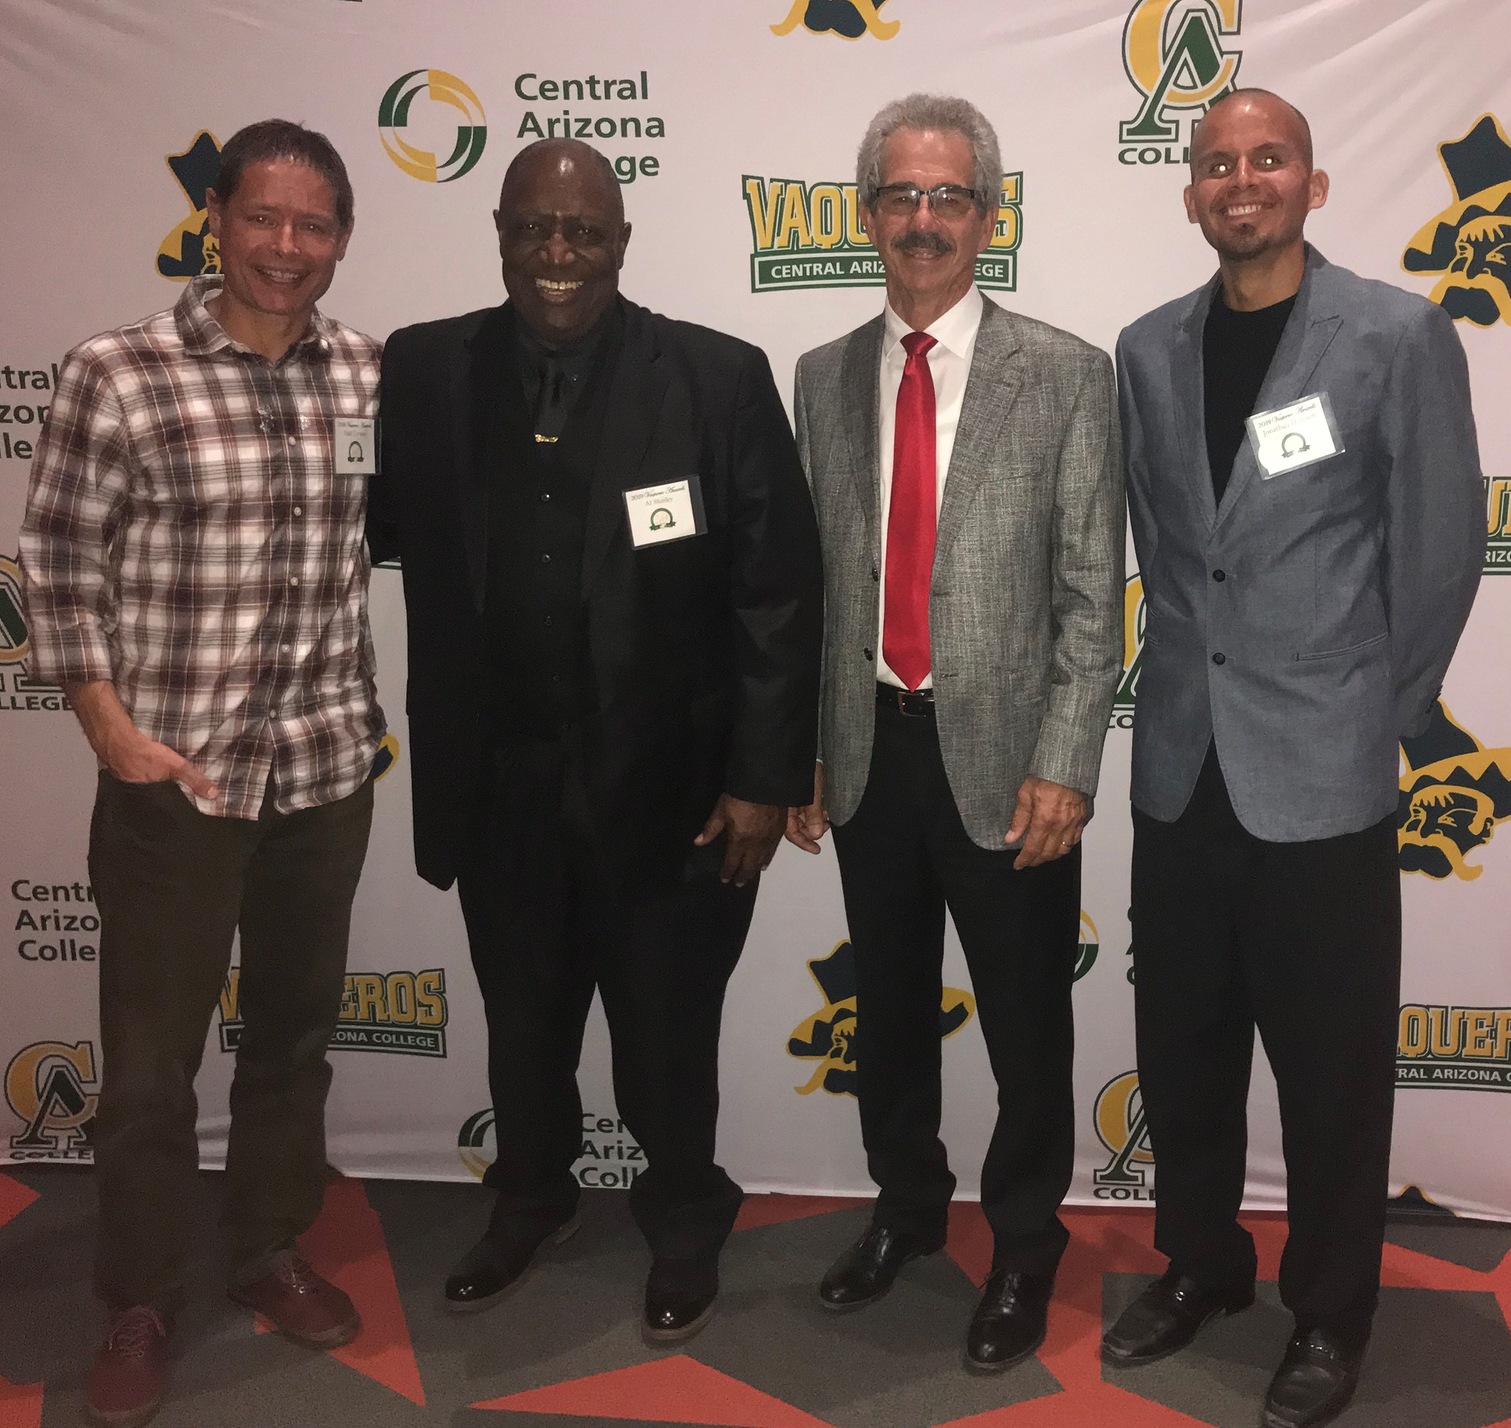 “CAC Cross Country Coaches from left to right: Paul Tavares (2009-2019), Al Shirley (1998-2010), Mike Gray (1996-2009), Jonathan Harmon (2010-Current)”